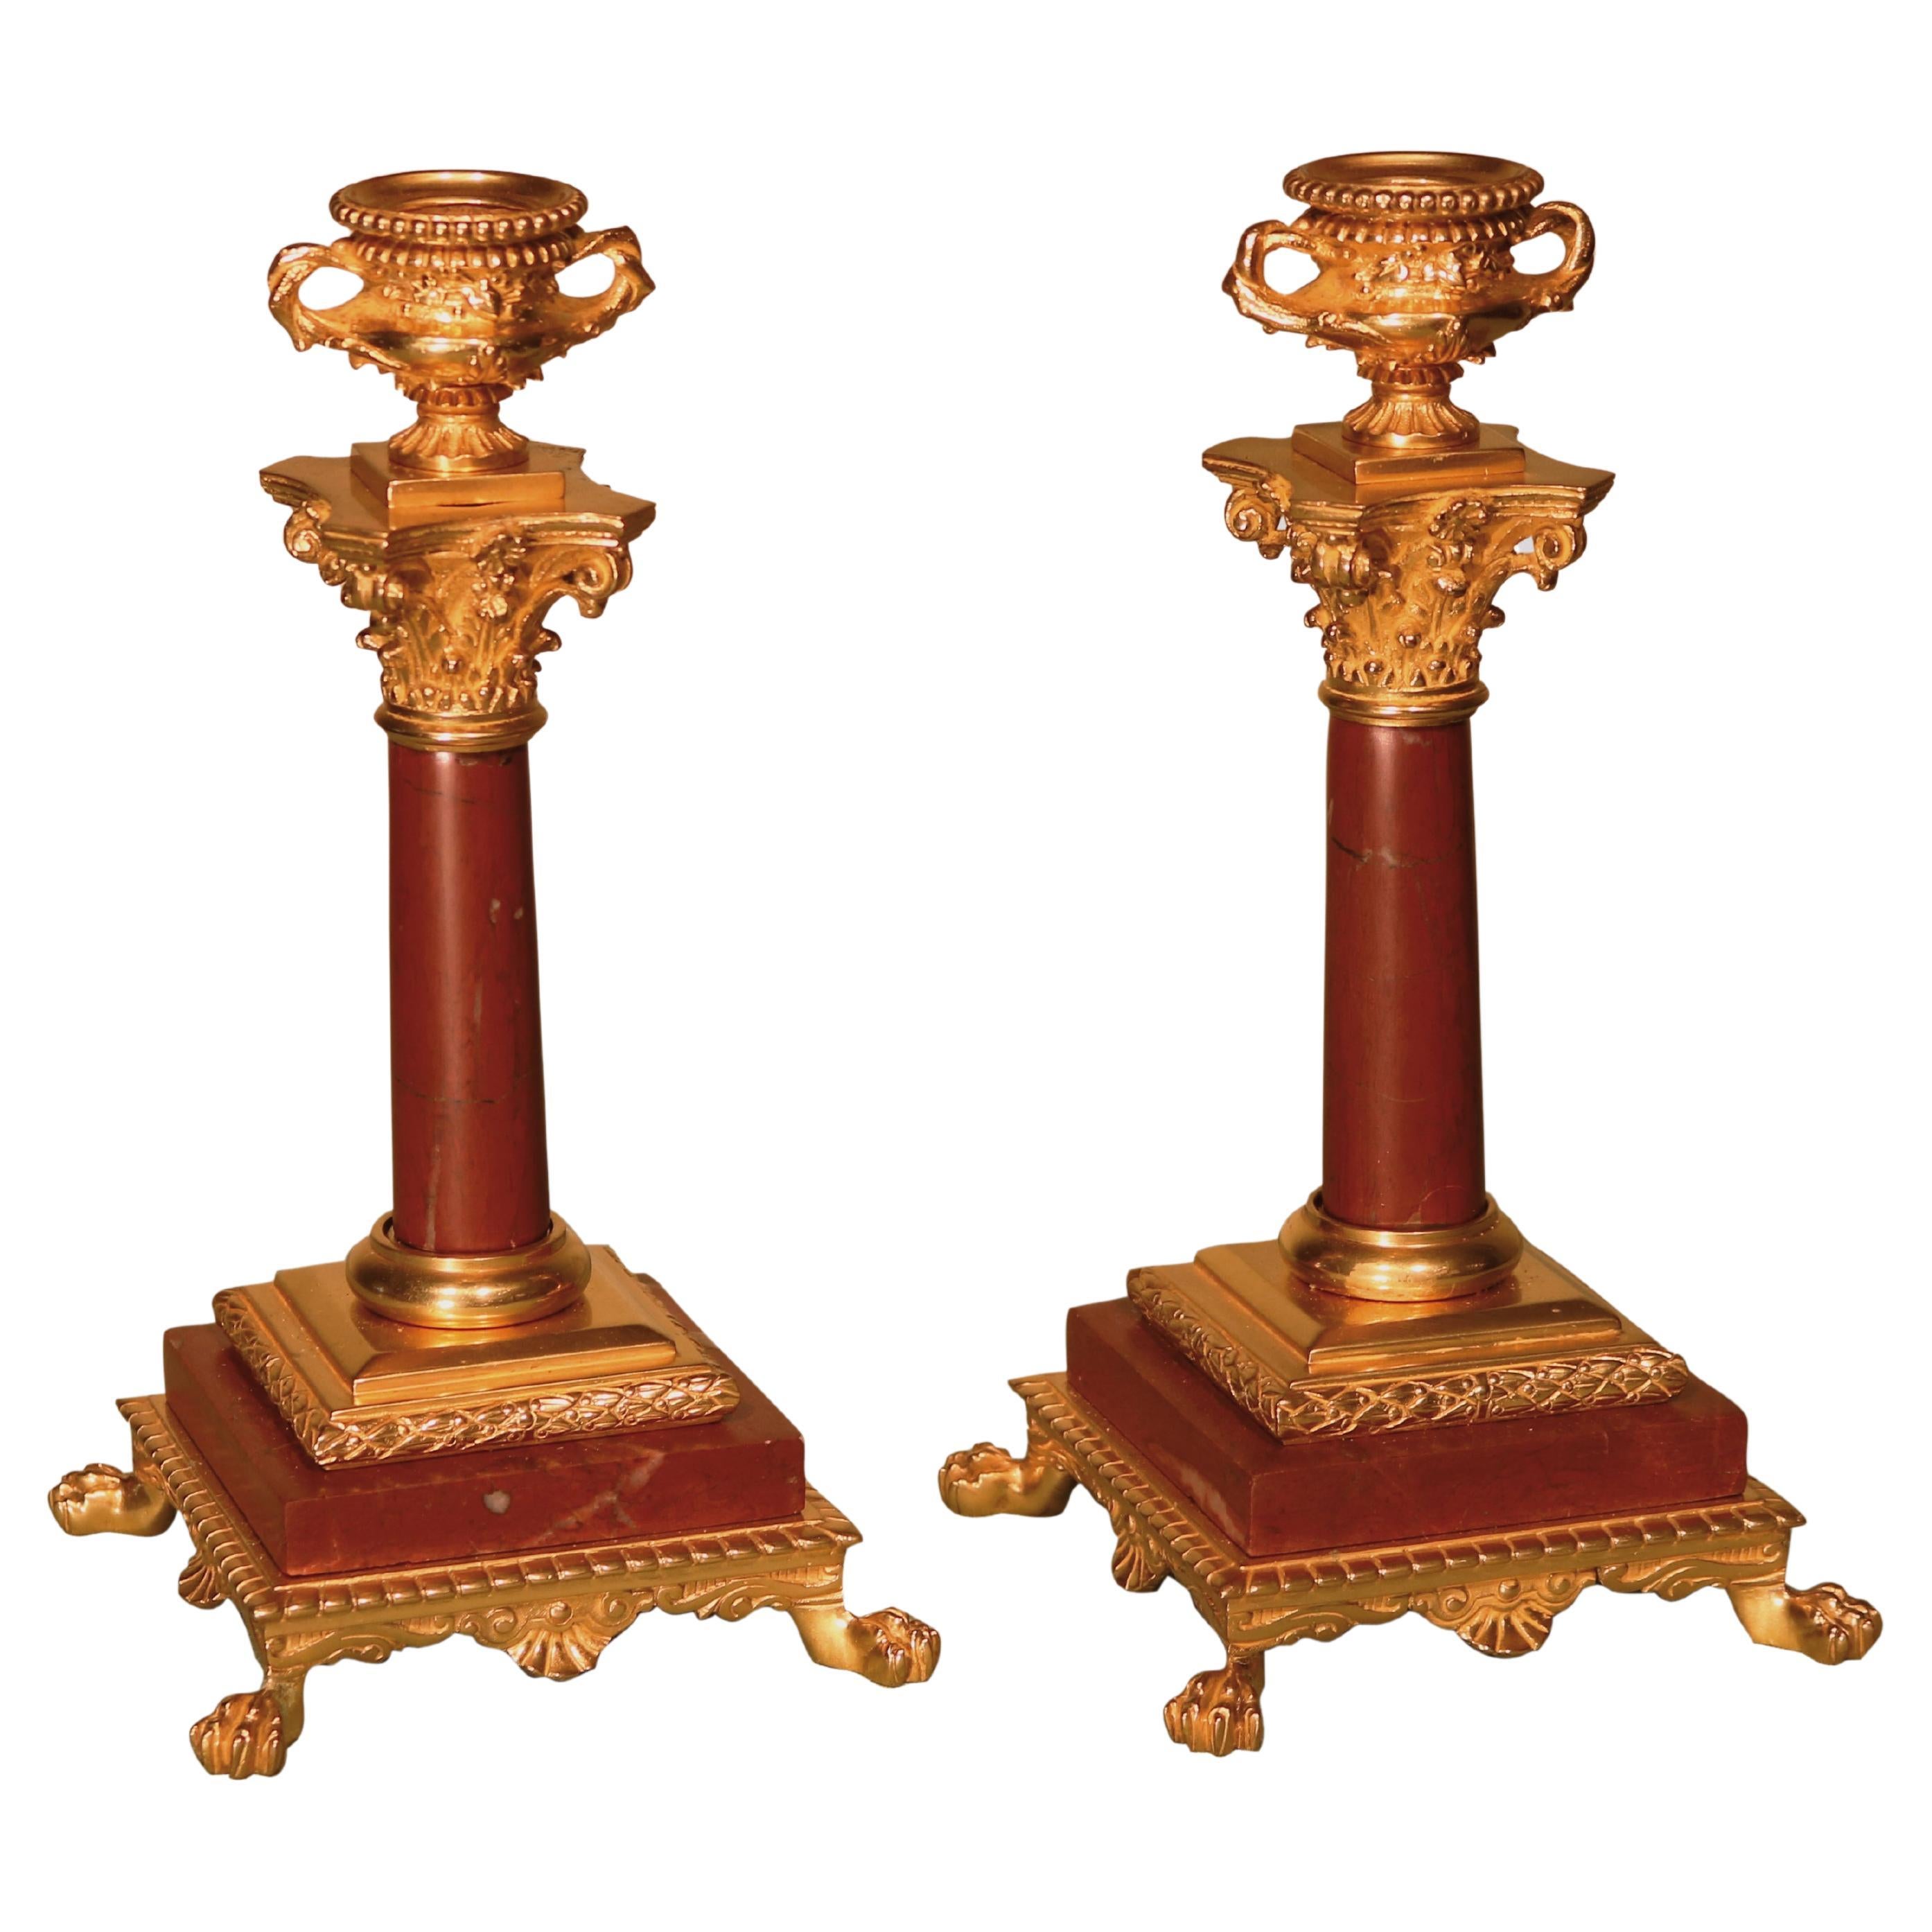 Pair of Late 19th Century Ormolu and Marble Candlesticks